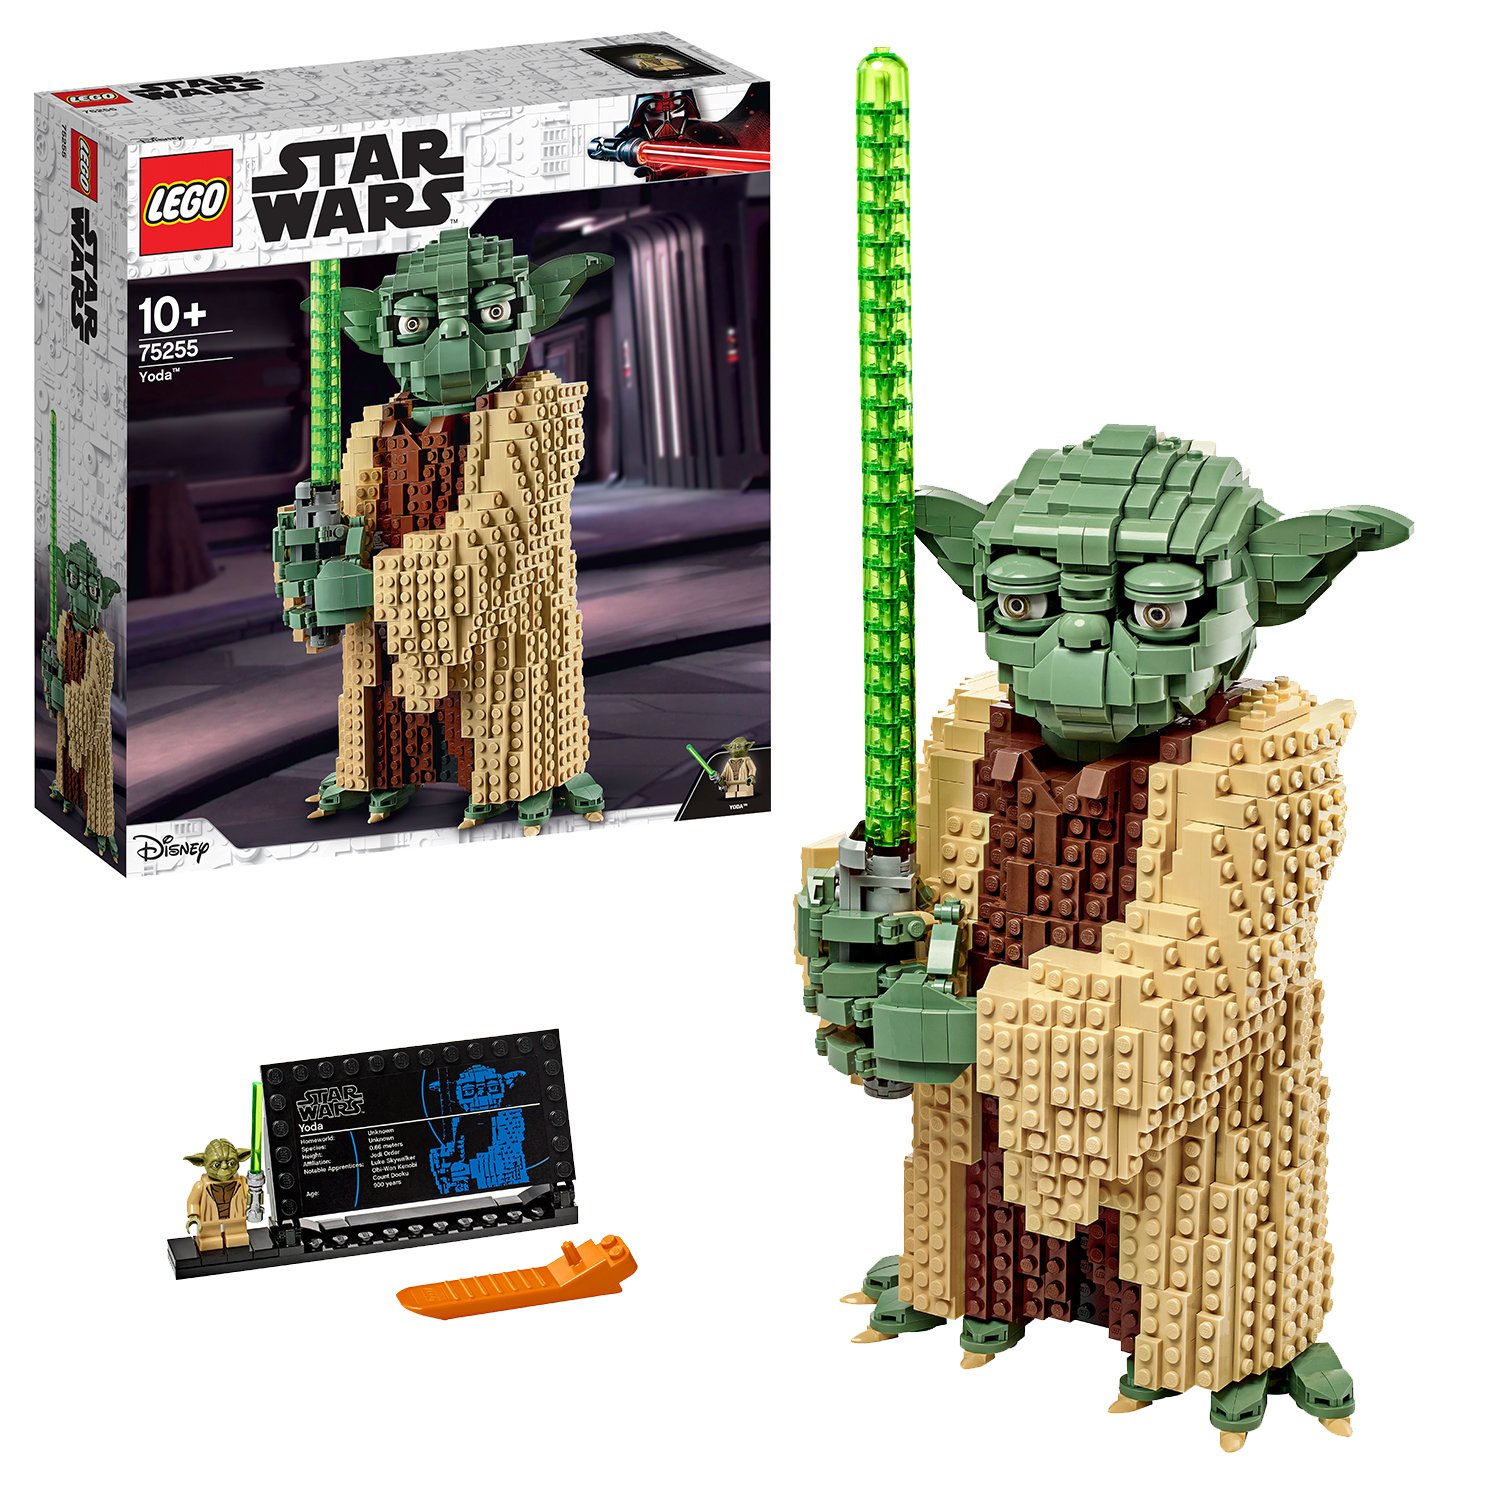 LEGO Star Wars Yoda Figure Attack of the Clones Set Review